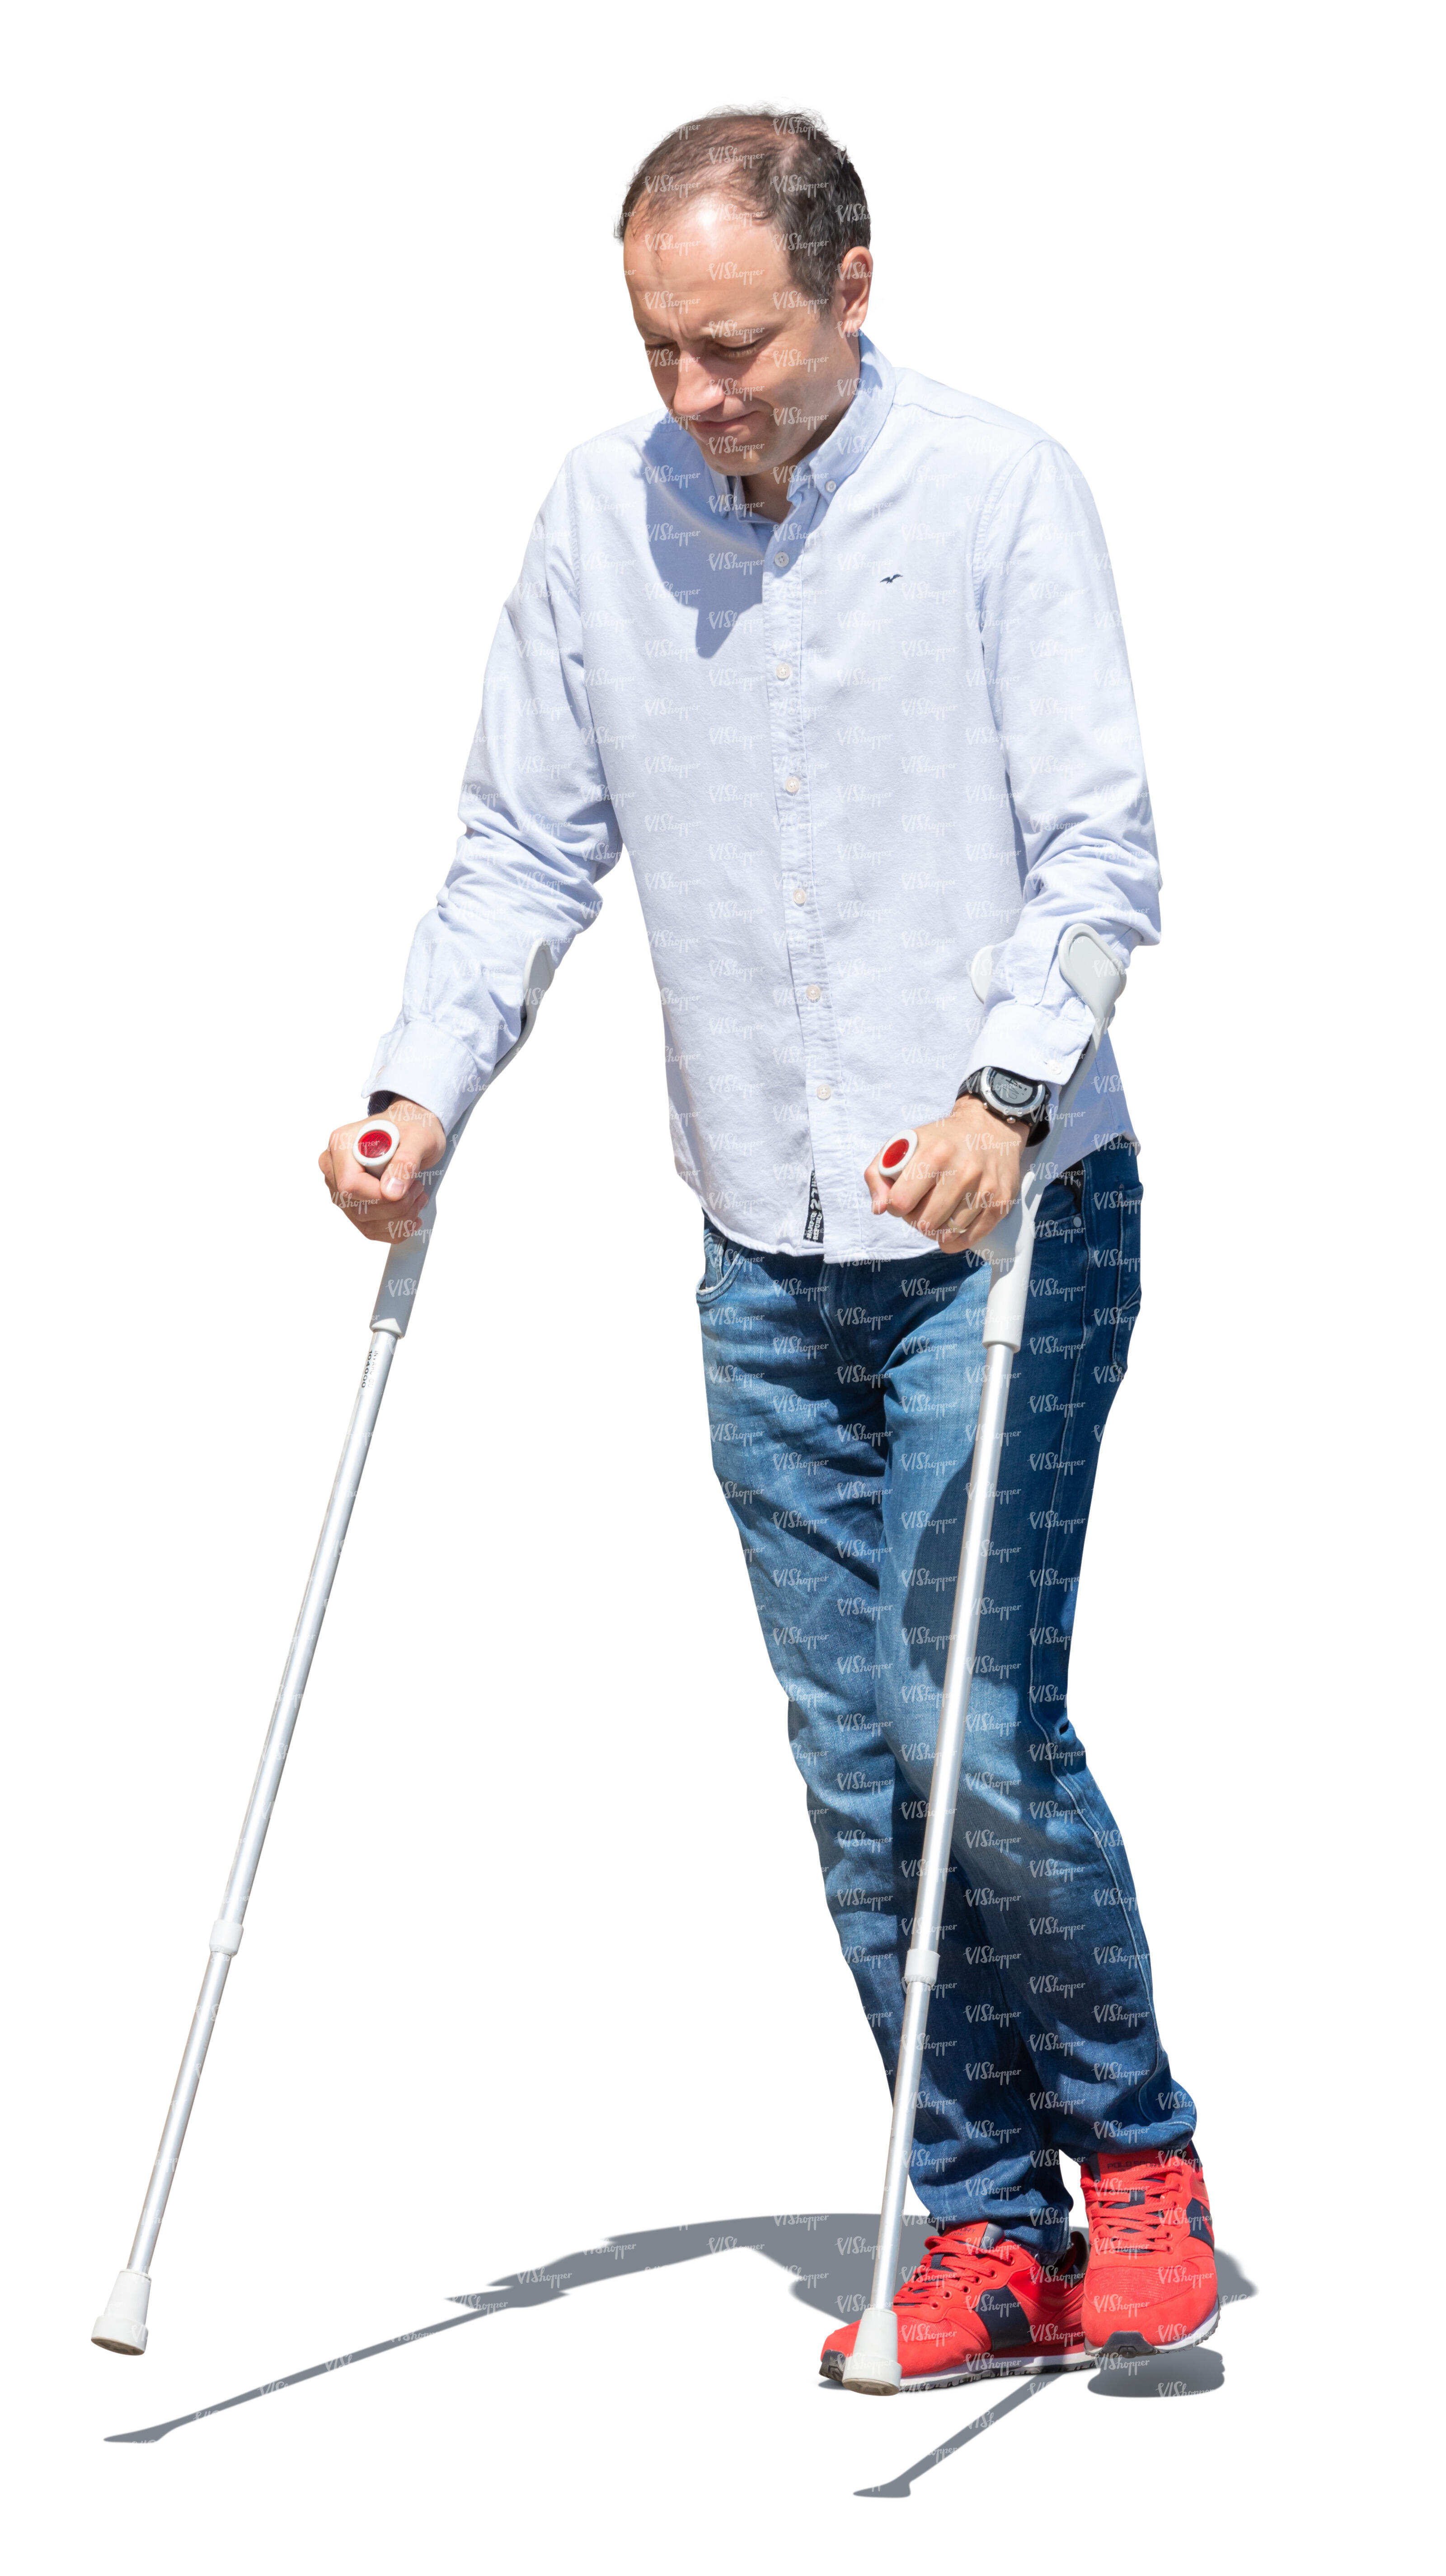 18891_cut-out-man-walking-with-crutches.jpg